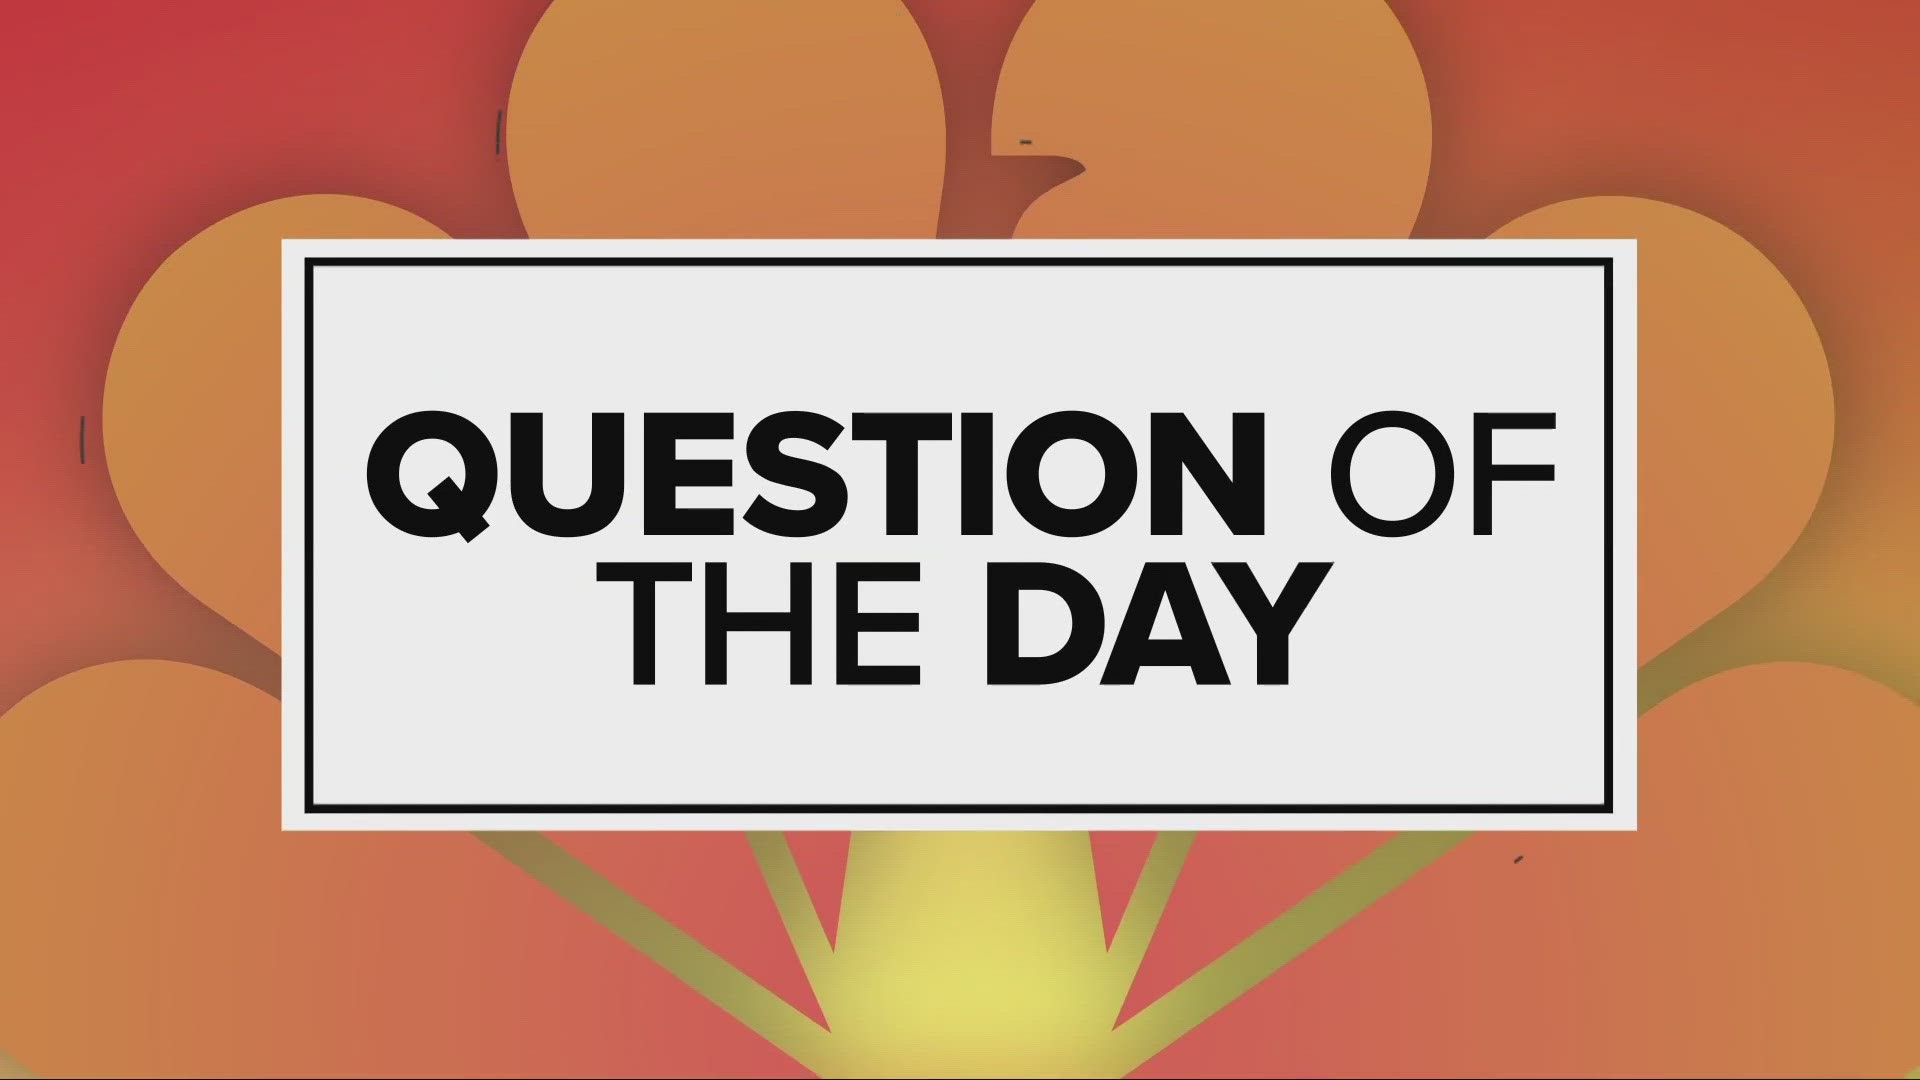 Browns fans react to Nick Chubb’s knee injury, and weigh in on who Browns should sign at running back as they answer our Question of the Day. Stephanie Haney shares